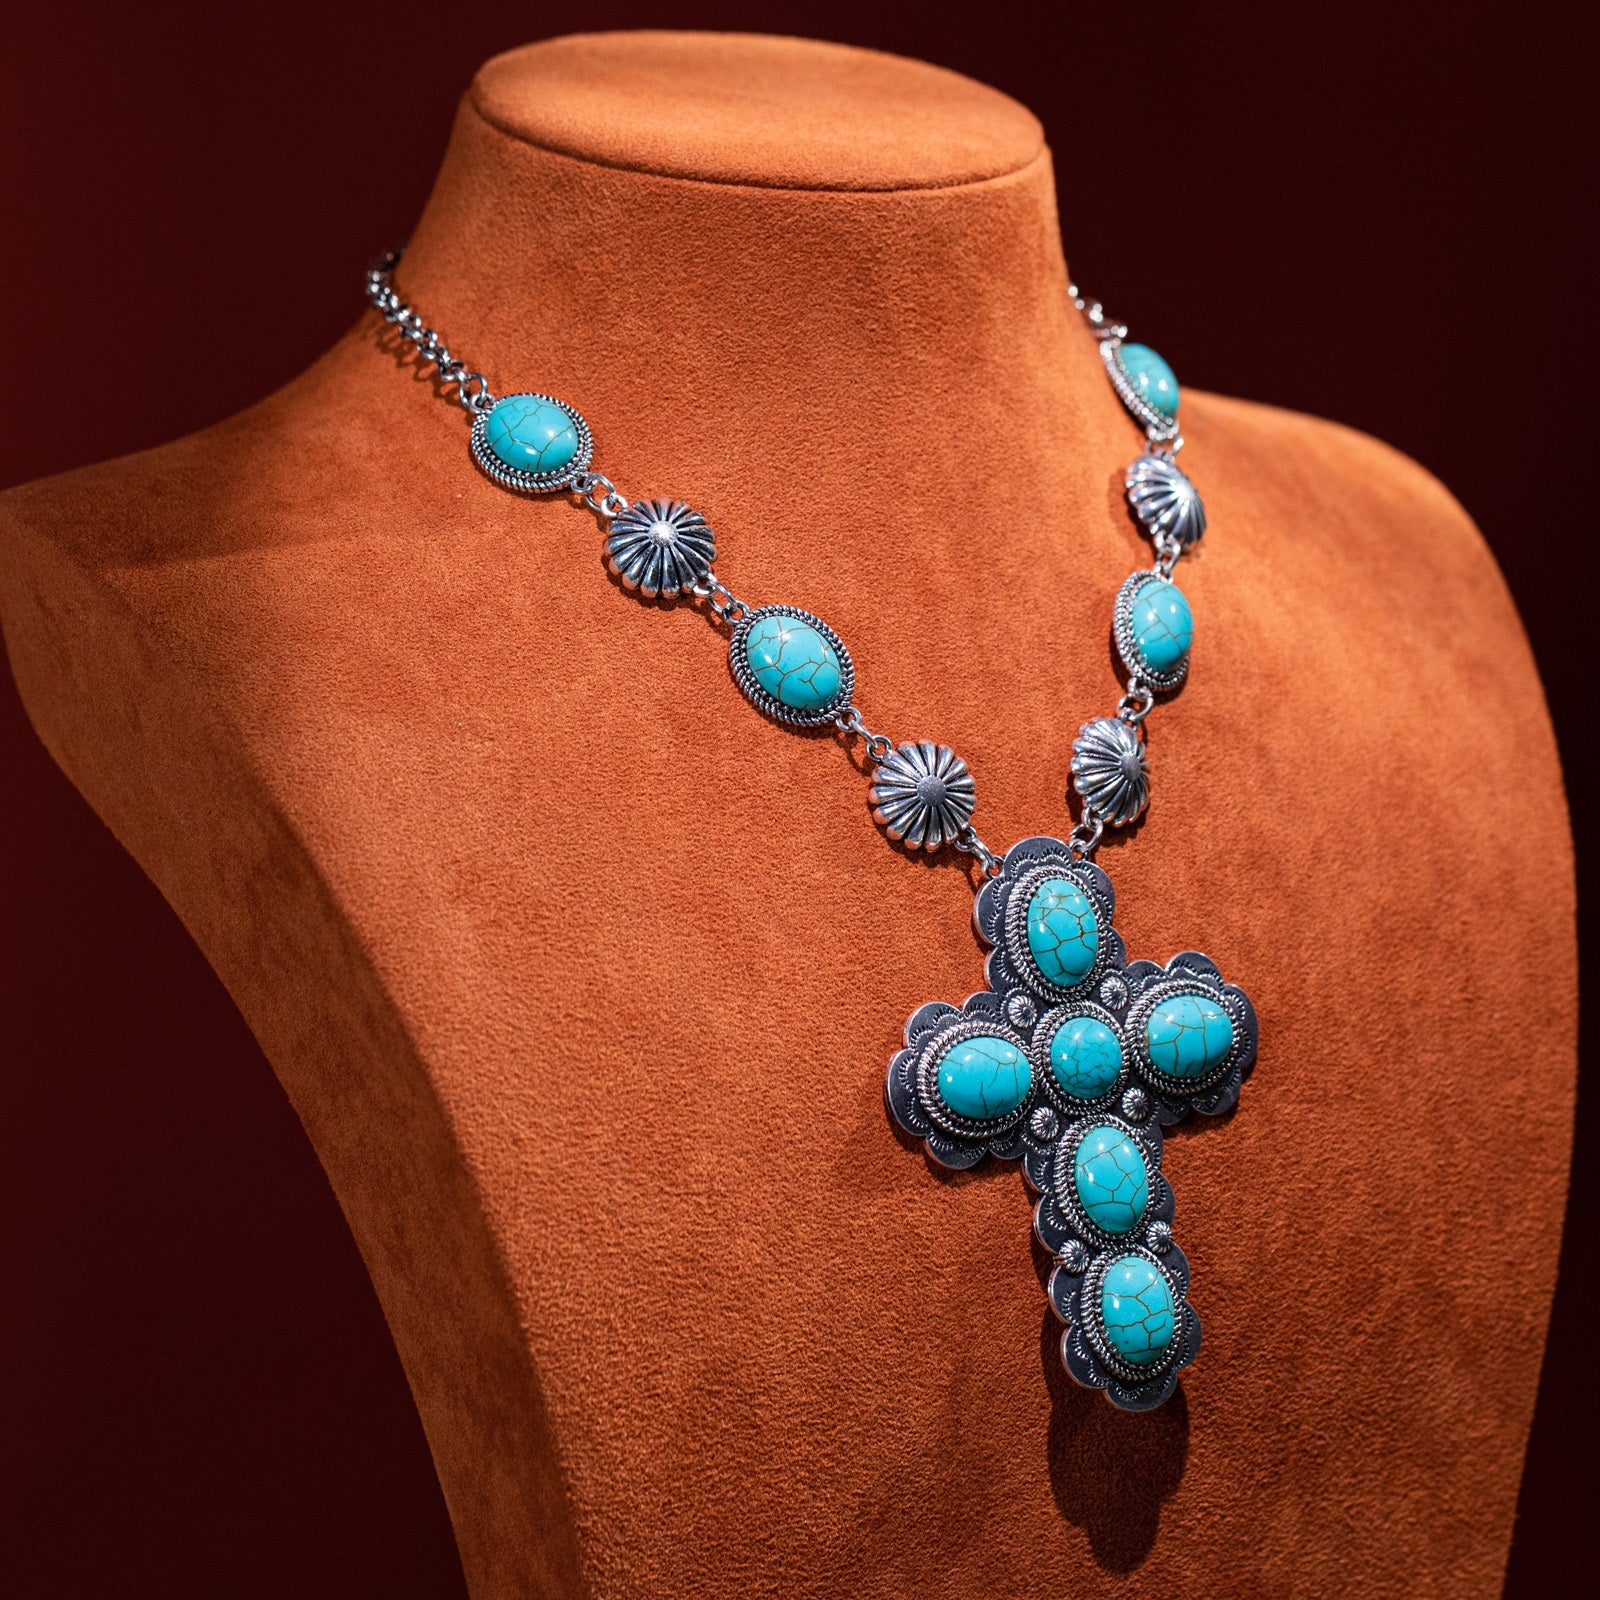 Rustic Couture  Turquoise Concho Statement Necklace - Cowgirl Wear